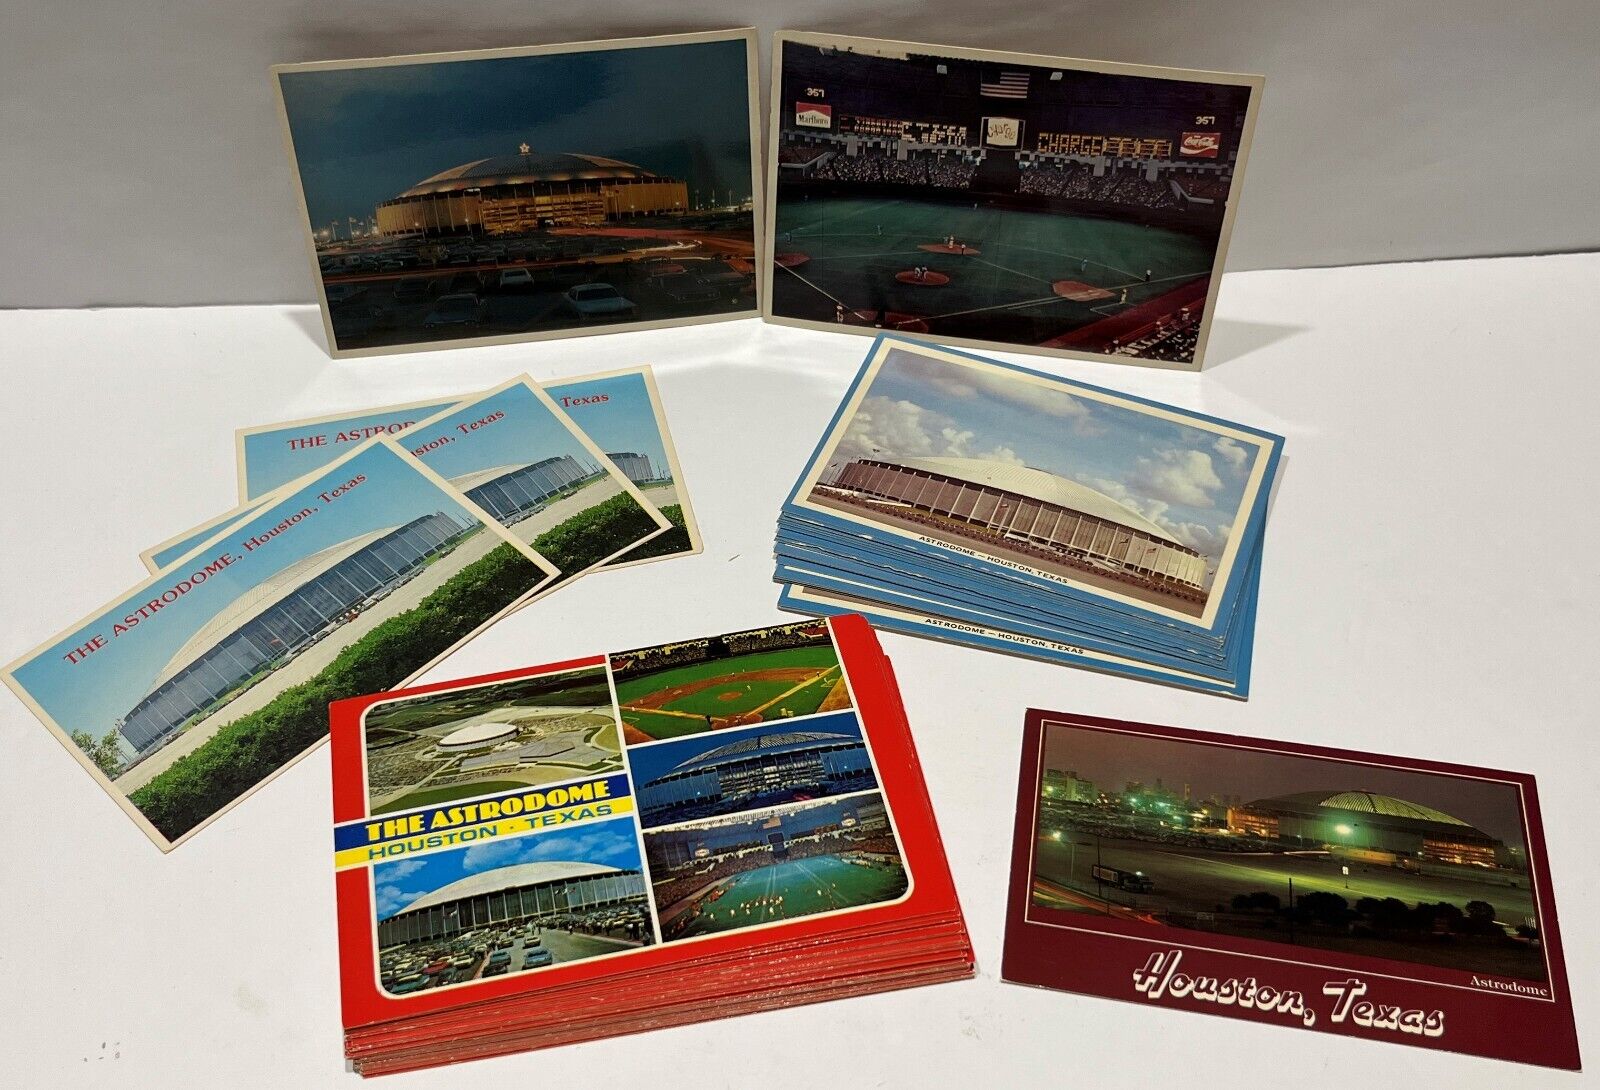 THE ASTRODOME Houston Texas Vintage Collection of Mixed Postcards Lot of 59